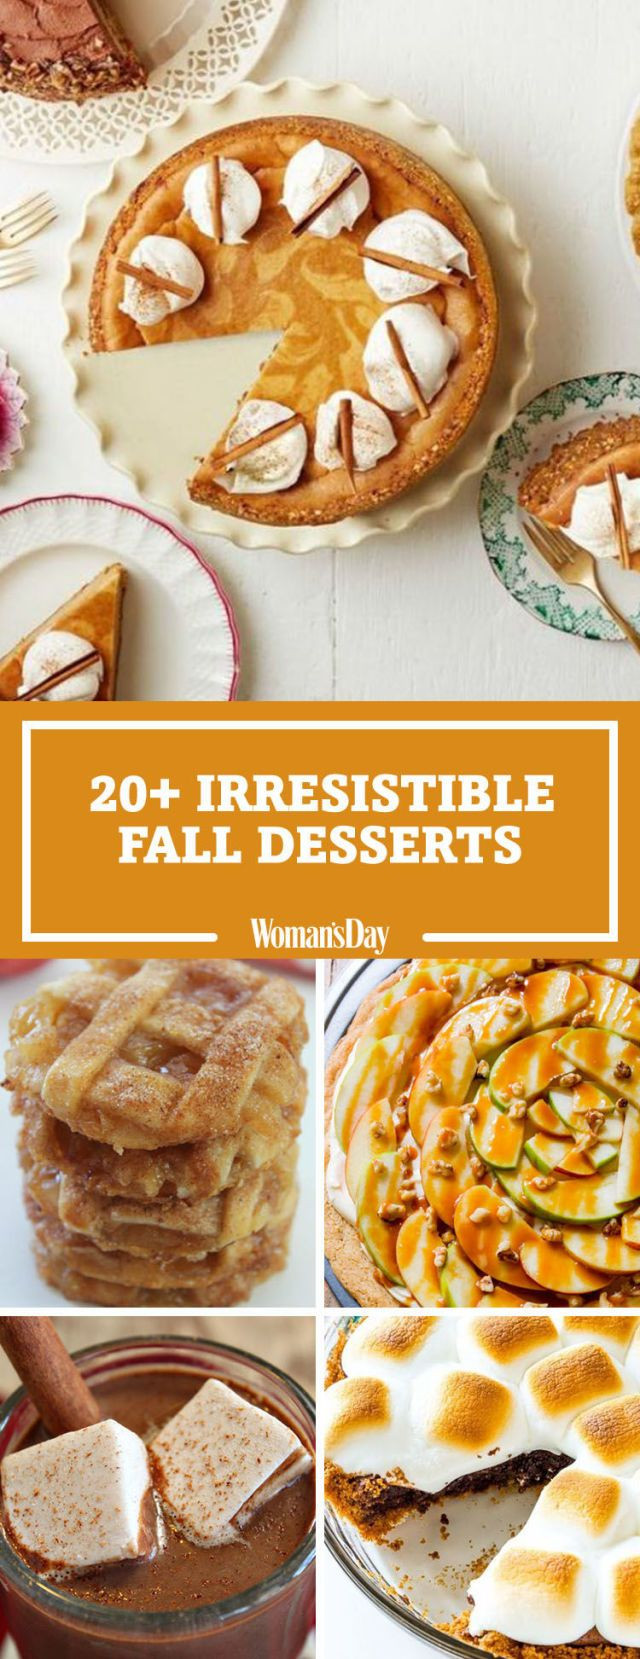 Desserts For Fall
 31 Easy Fall Desserts Best Recipes for Autumn Desserts